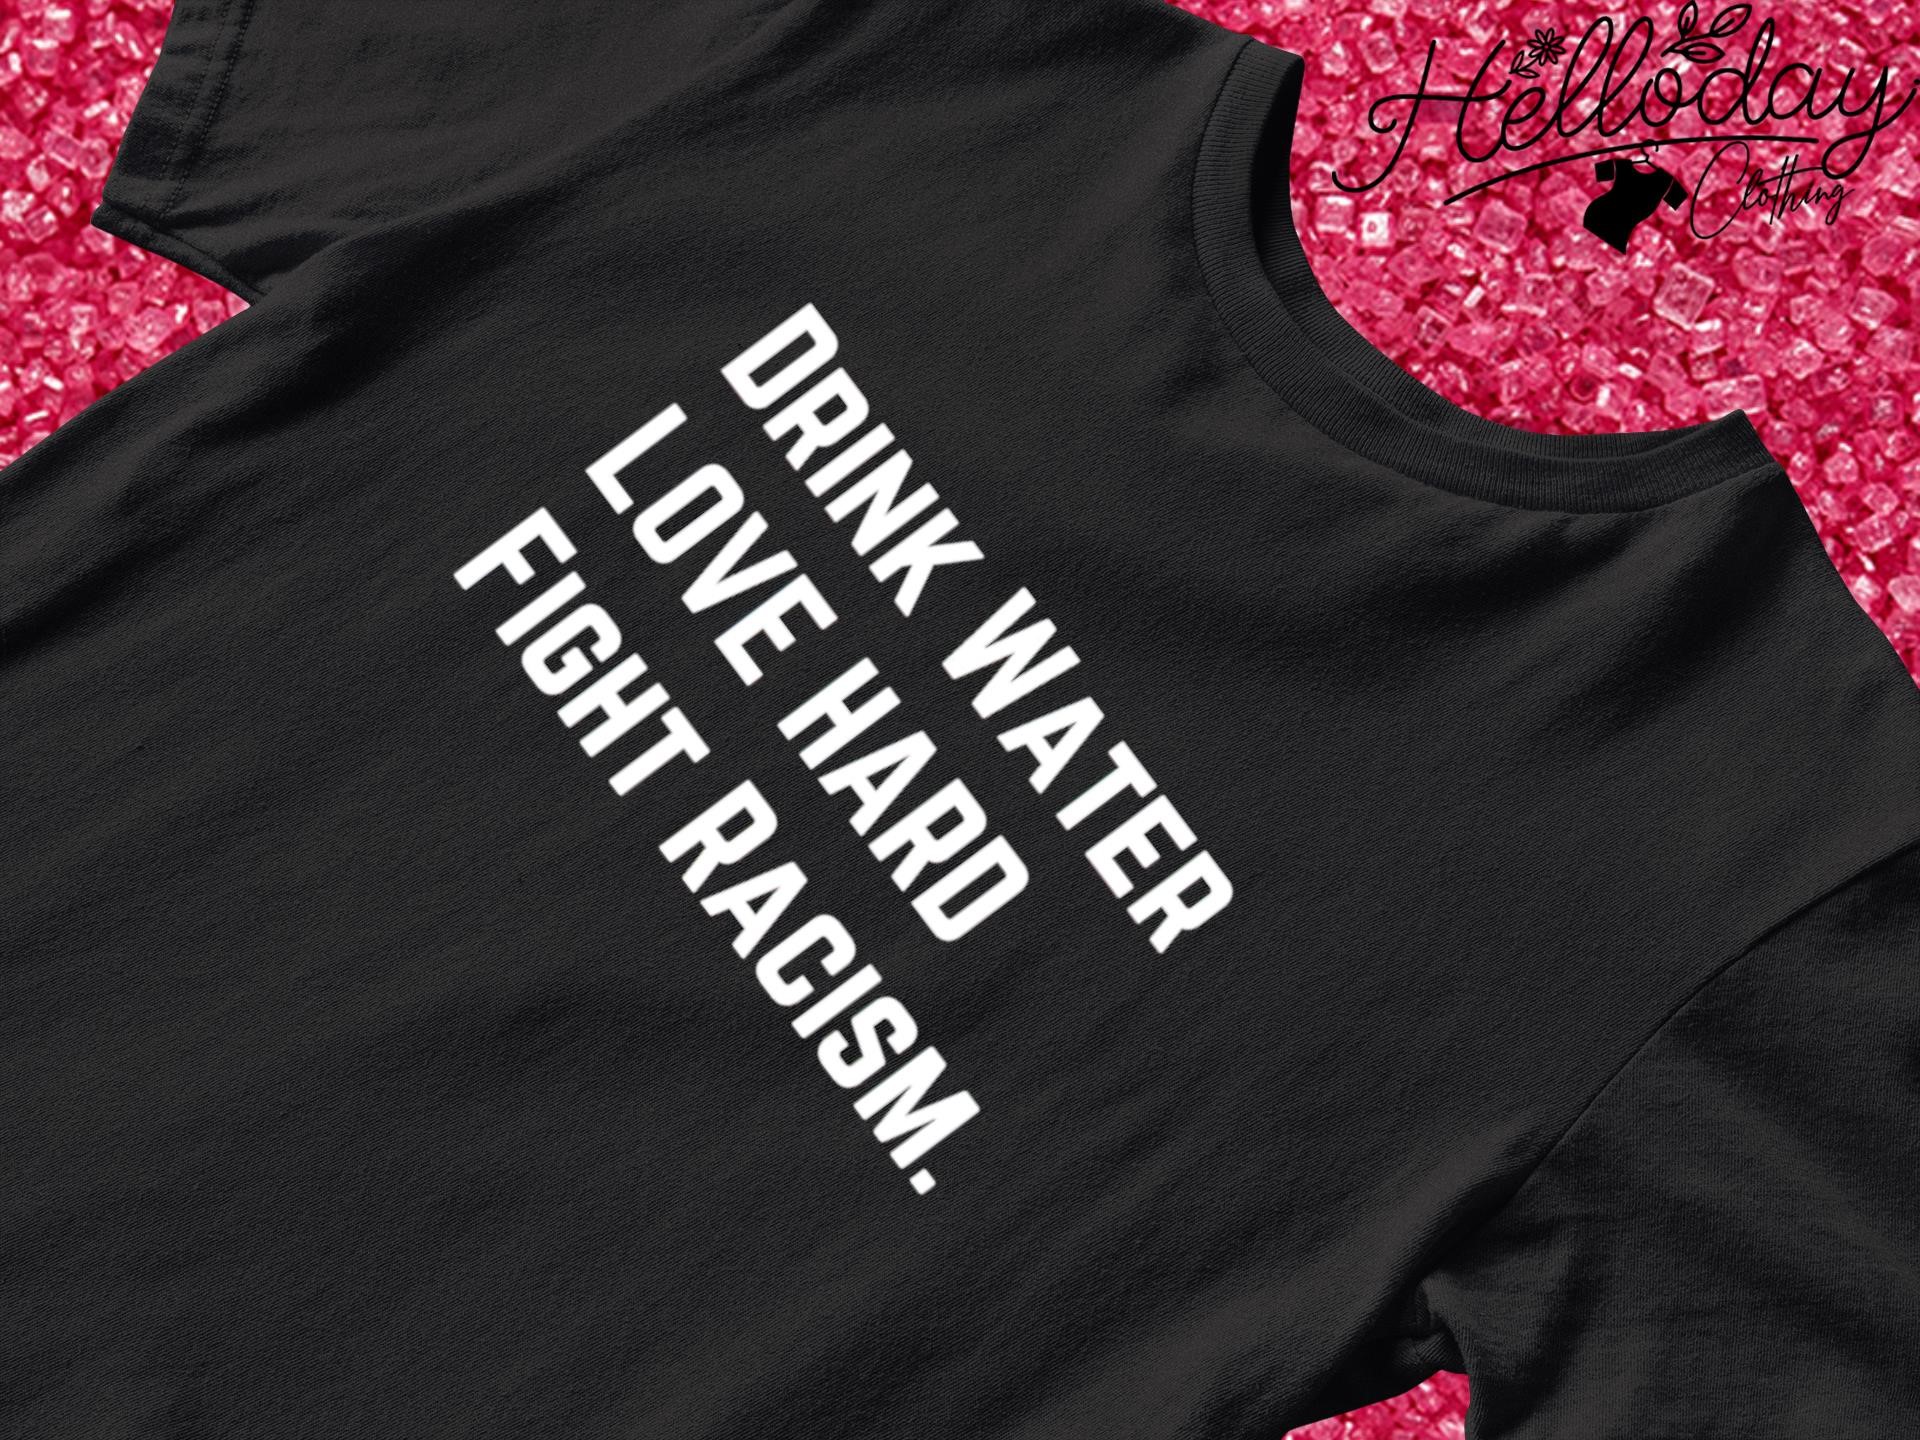 Drink water fight racism shirt